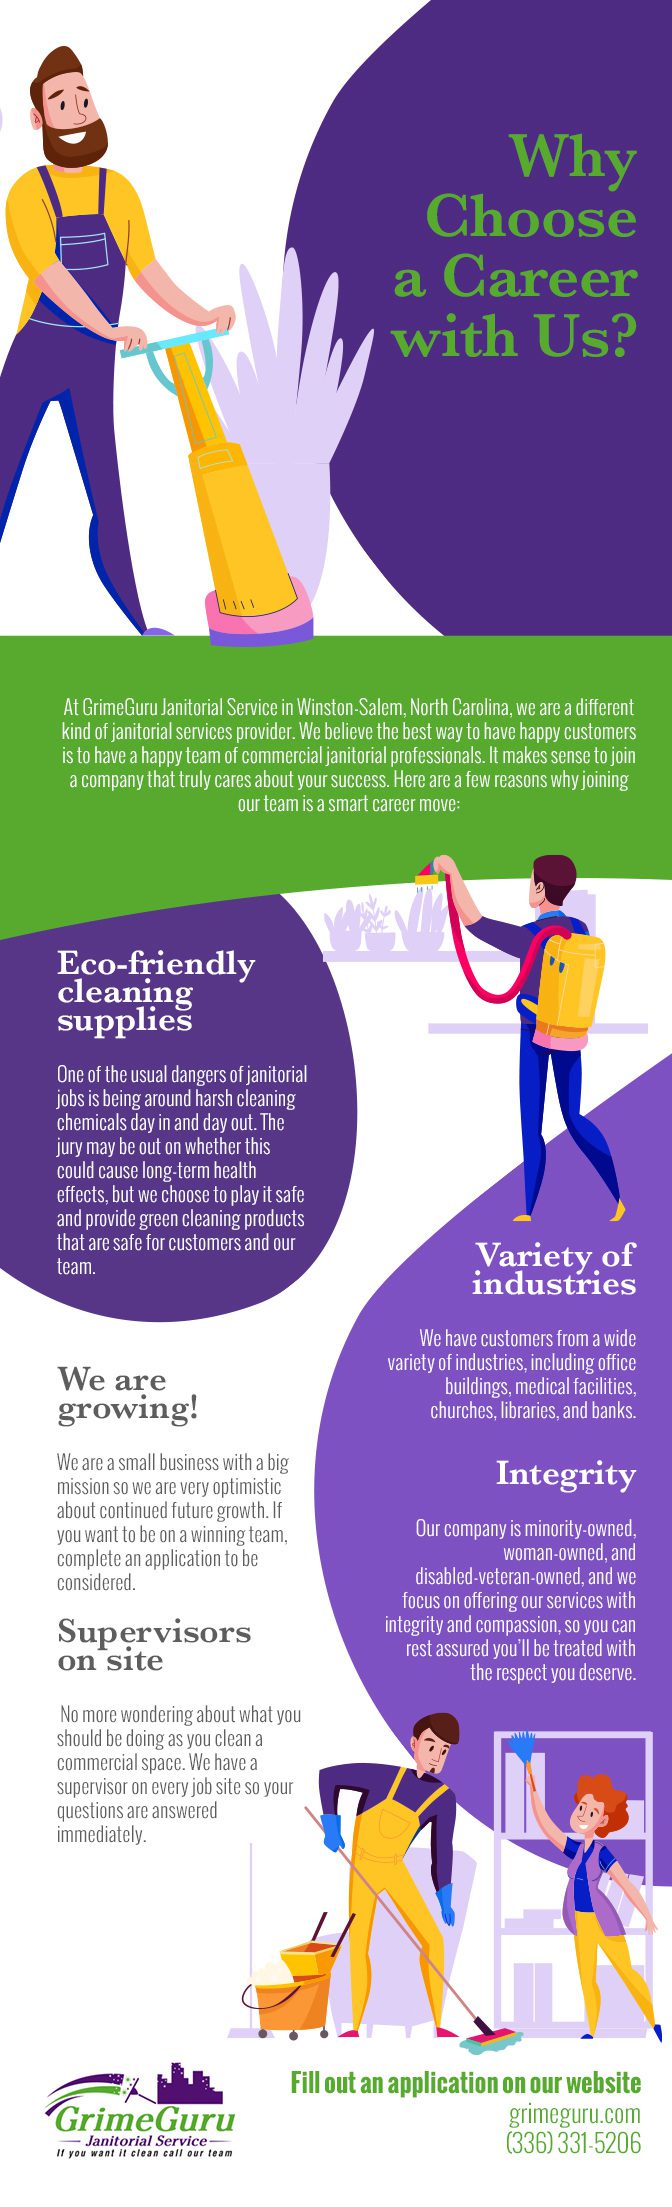 Why Choose a Career with Us? [infographic]